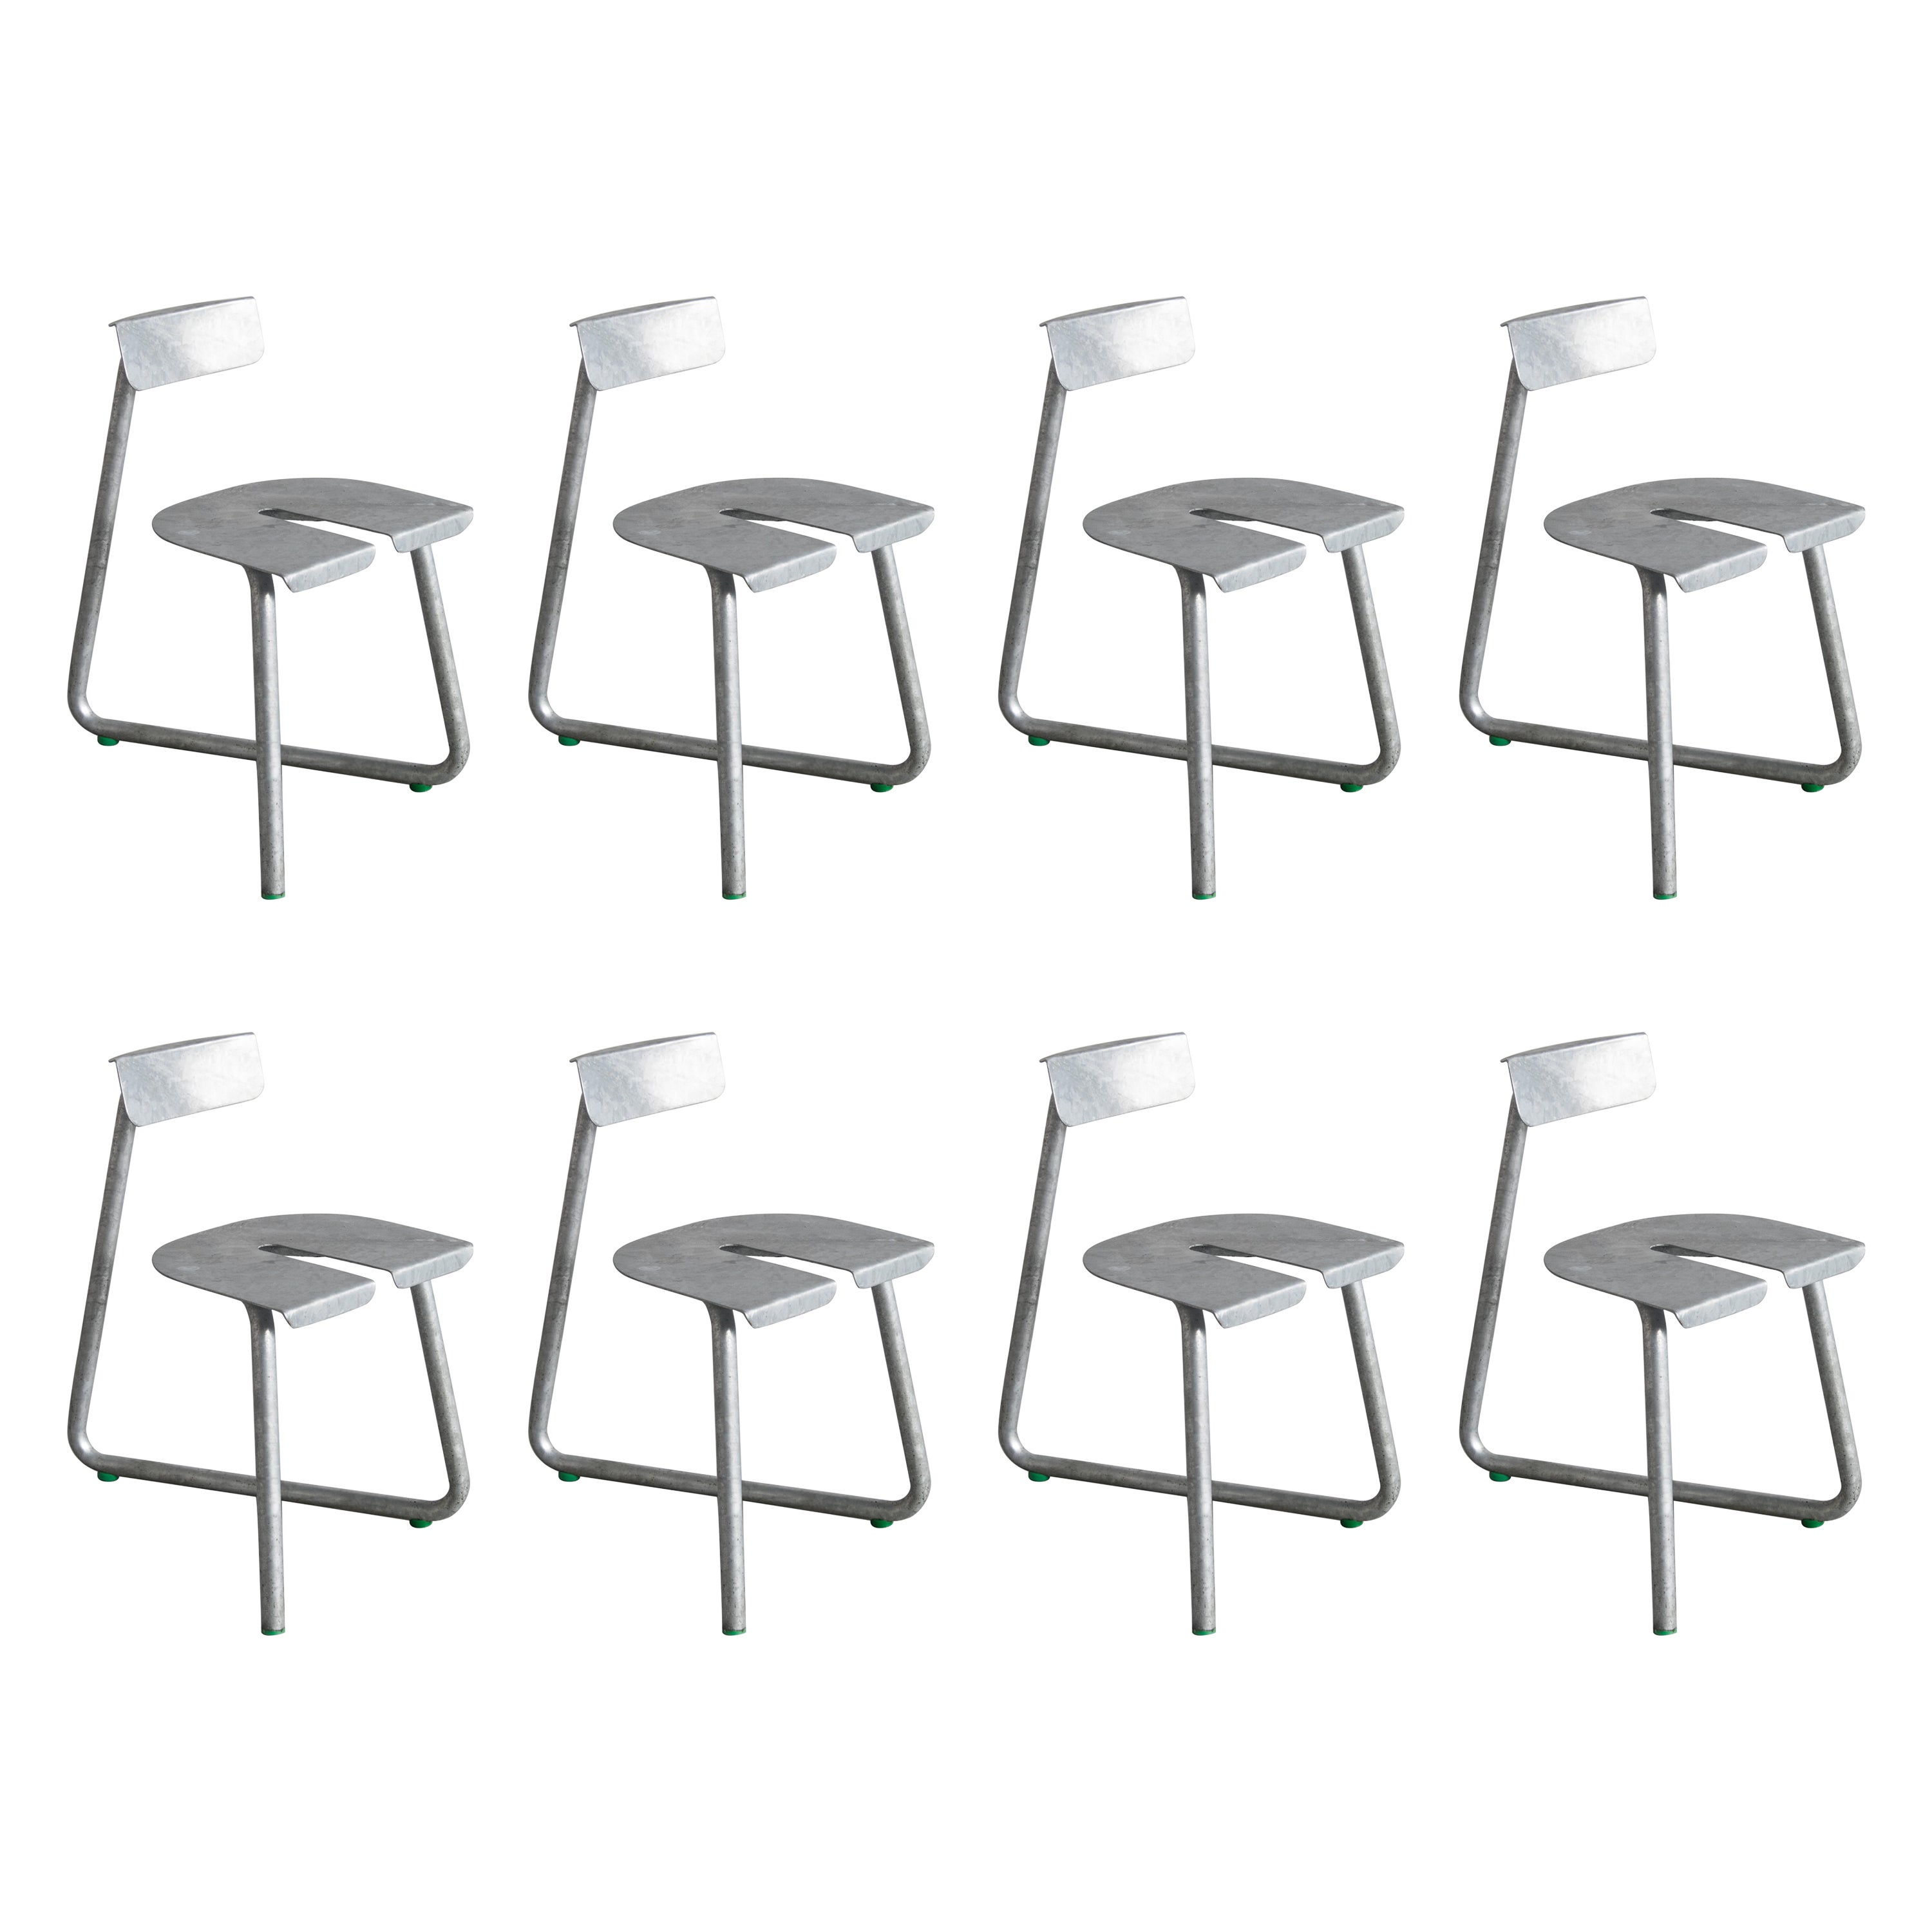 Set of 8 Galva Steel Outdoor Chairs by Atelier Thomas Serruys For Sale